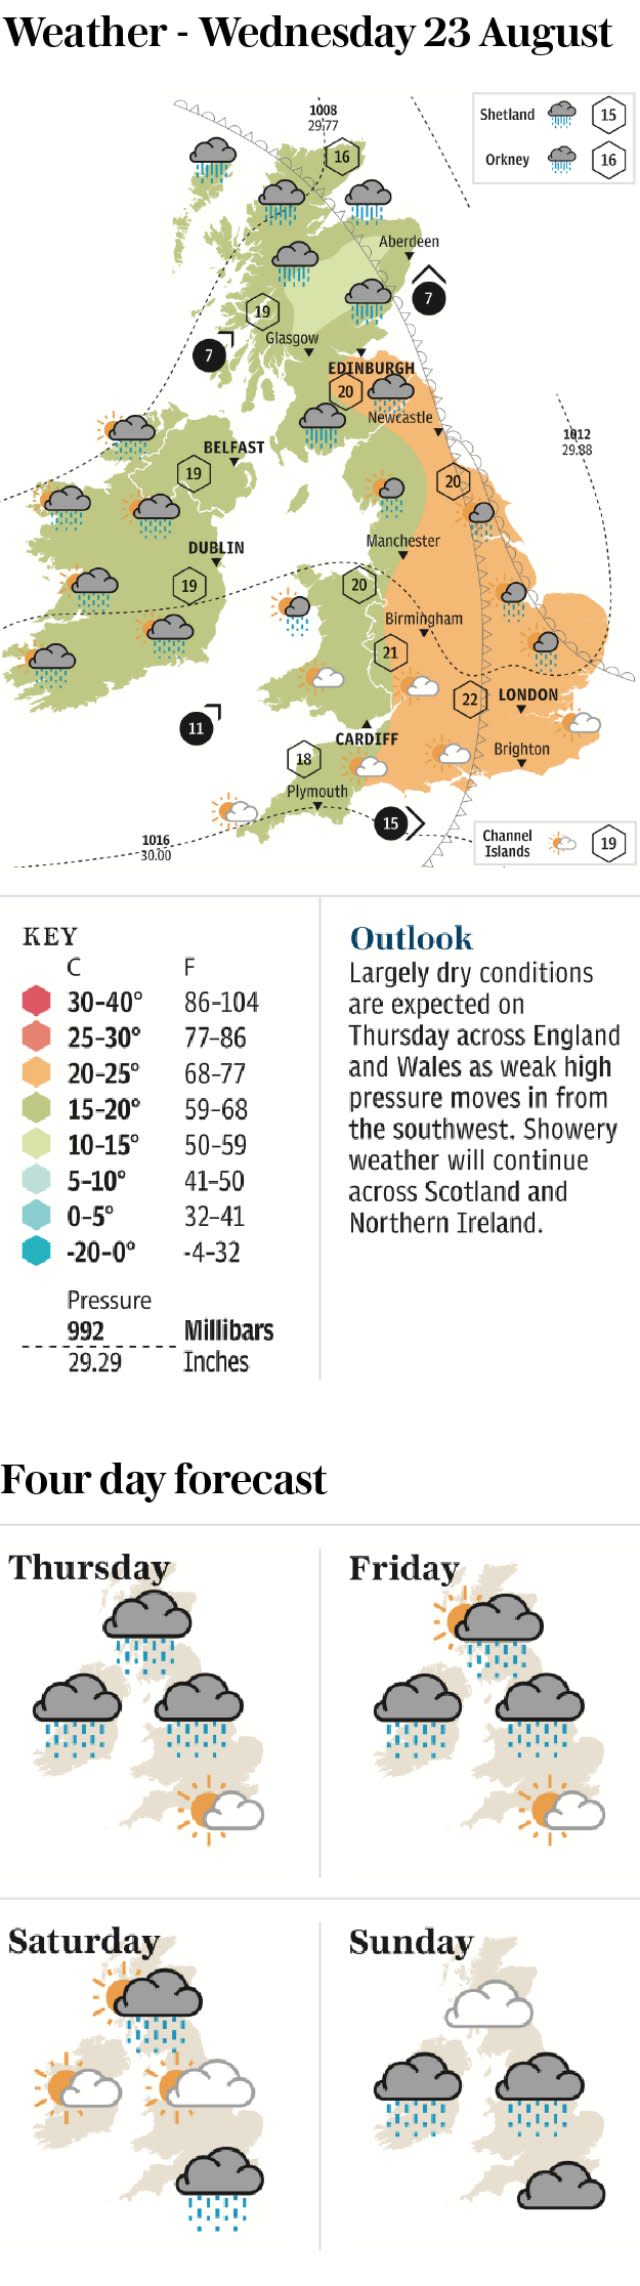 Weather for Wednesday 23 August